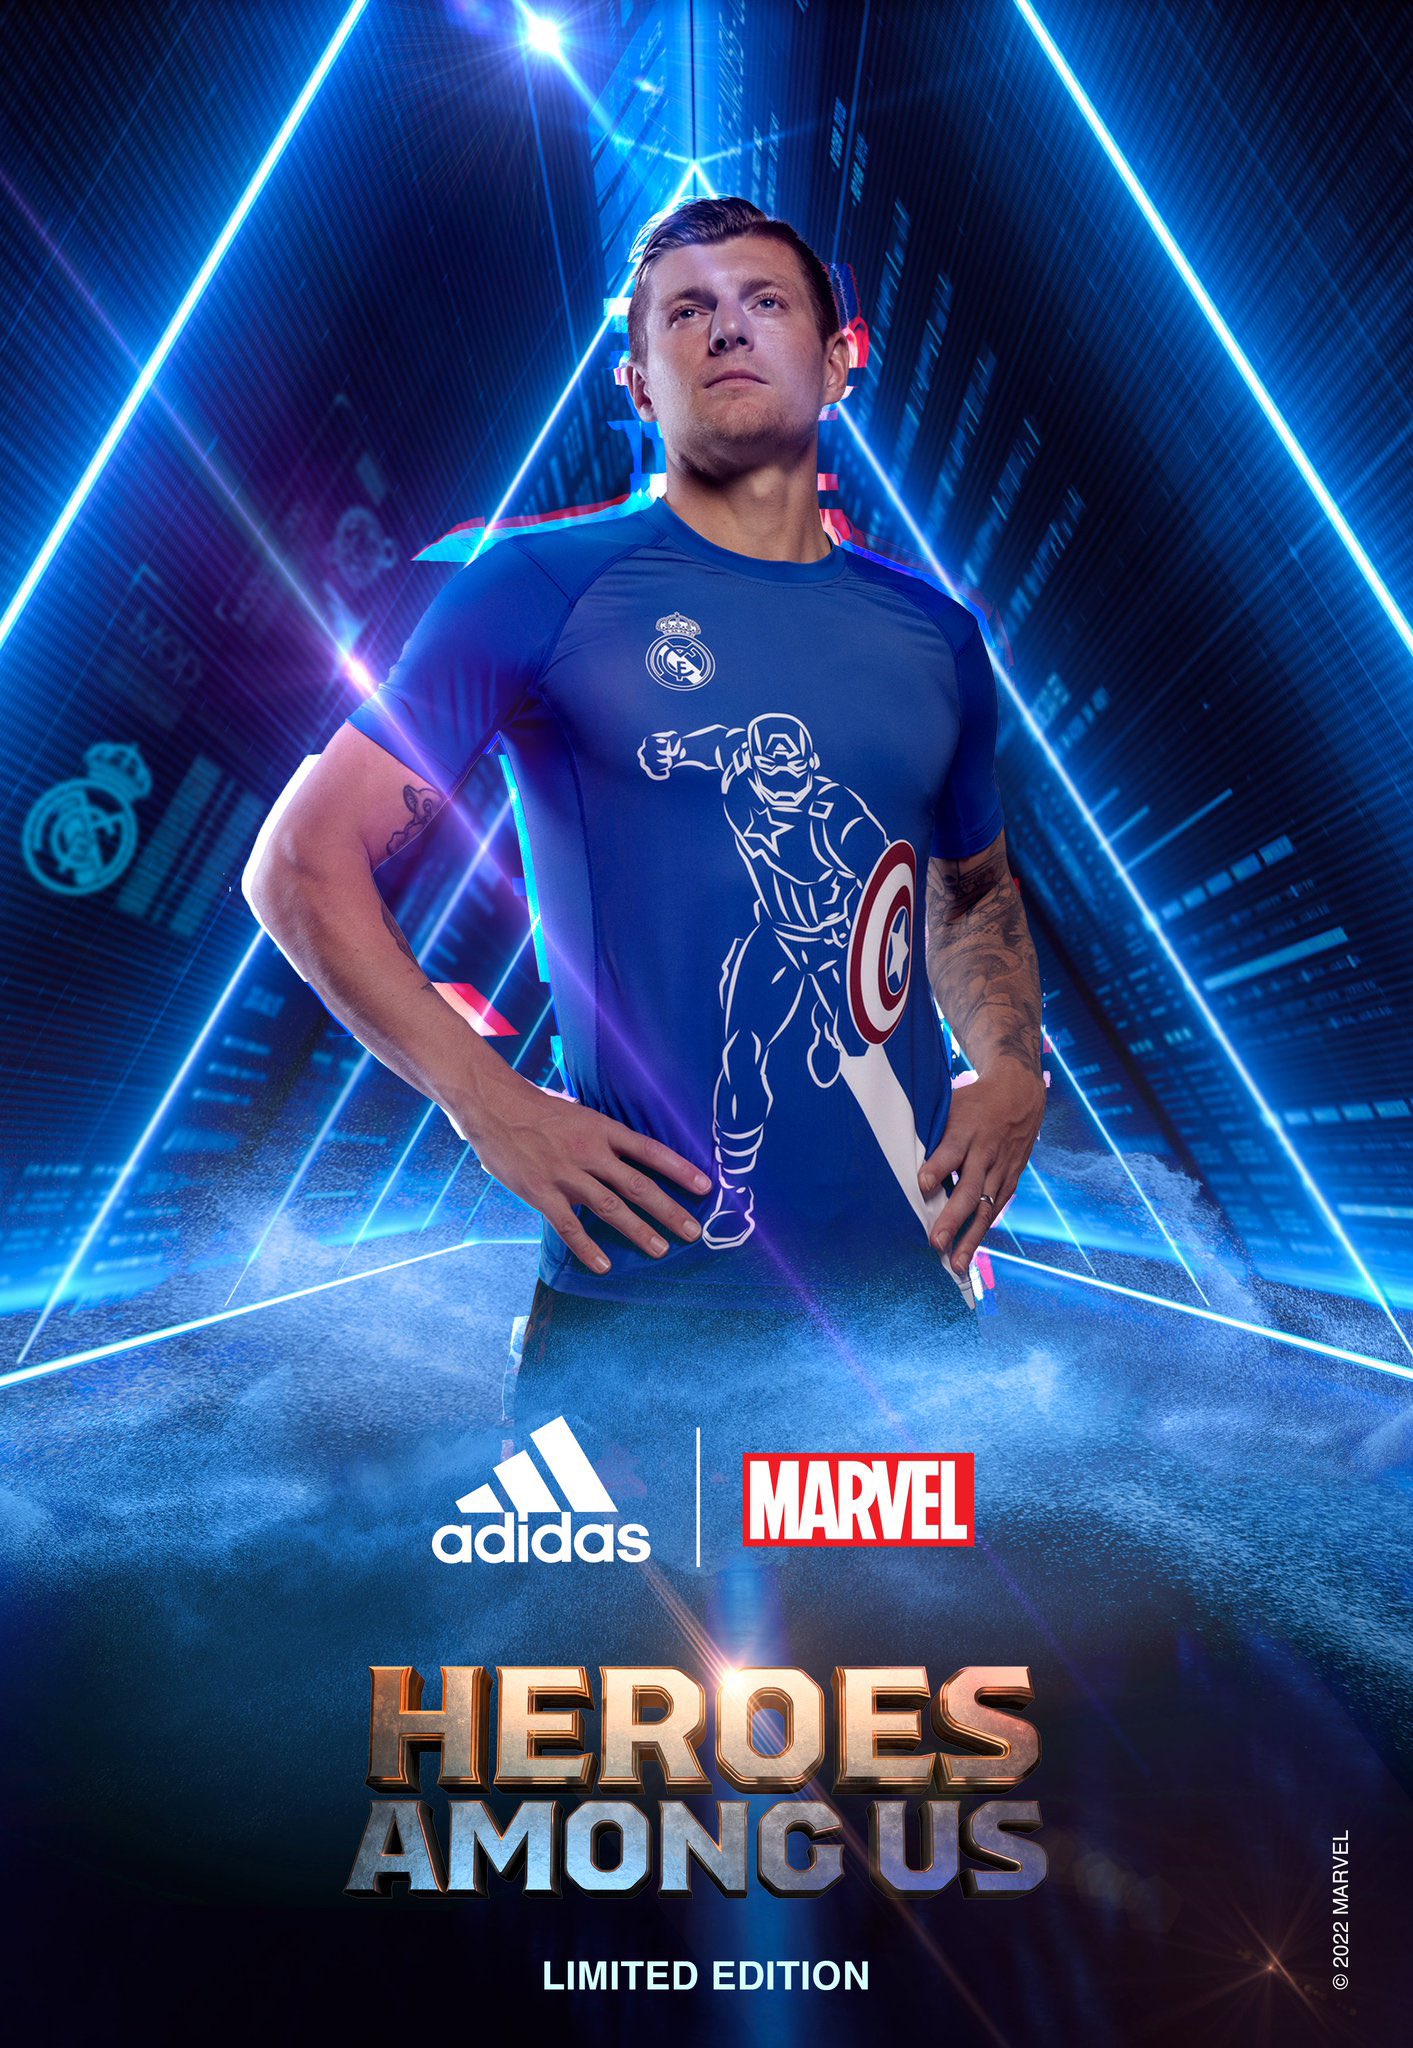 LaLiga Lowdown 🧡🇪🇸⚽️ on Twitter: "⚪️ Madridistas Assemble? 😅 👕 Adidas launched the new collection for Real Madrid in collaboration with Marvel 🏋️ The players will wear them during the warmup